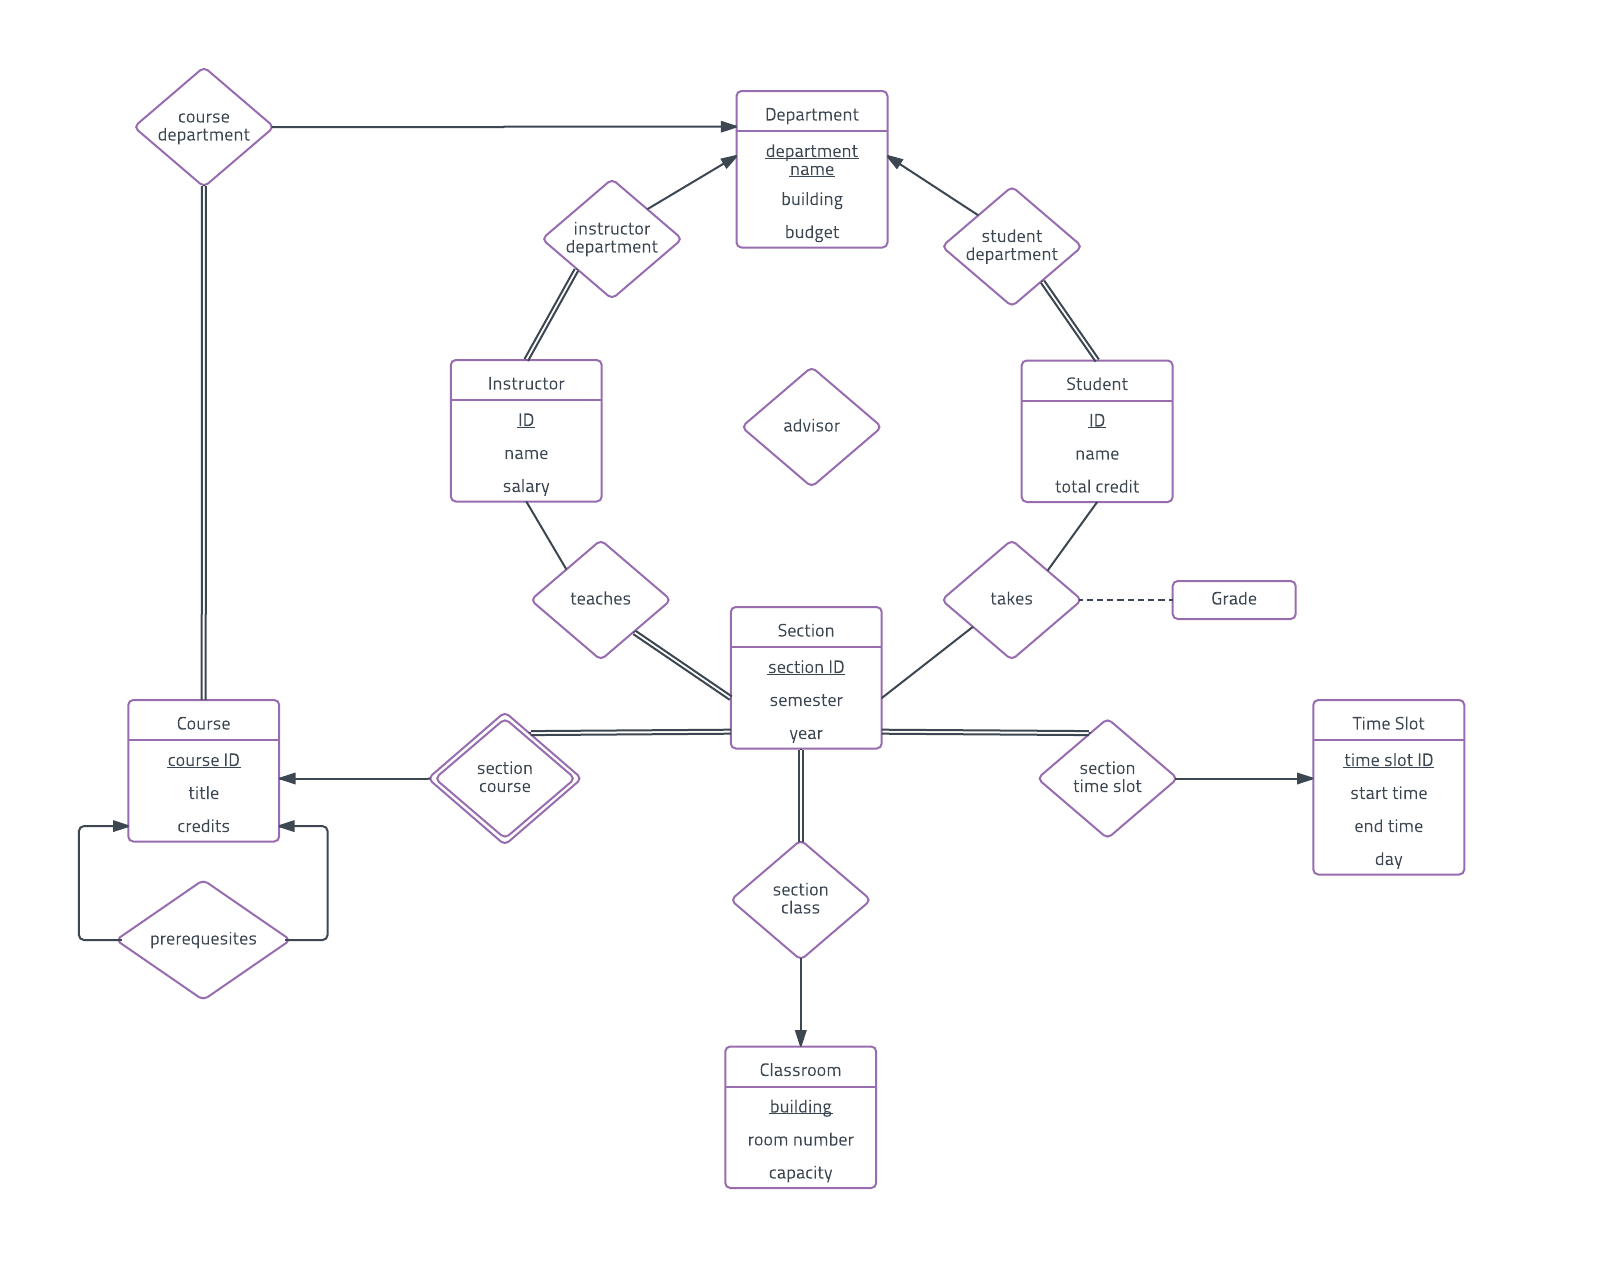 Er Diagram Examples And Templates | Lucidchart within Entity Relationship Diagram Explanation